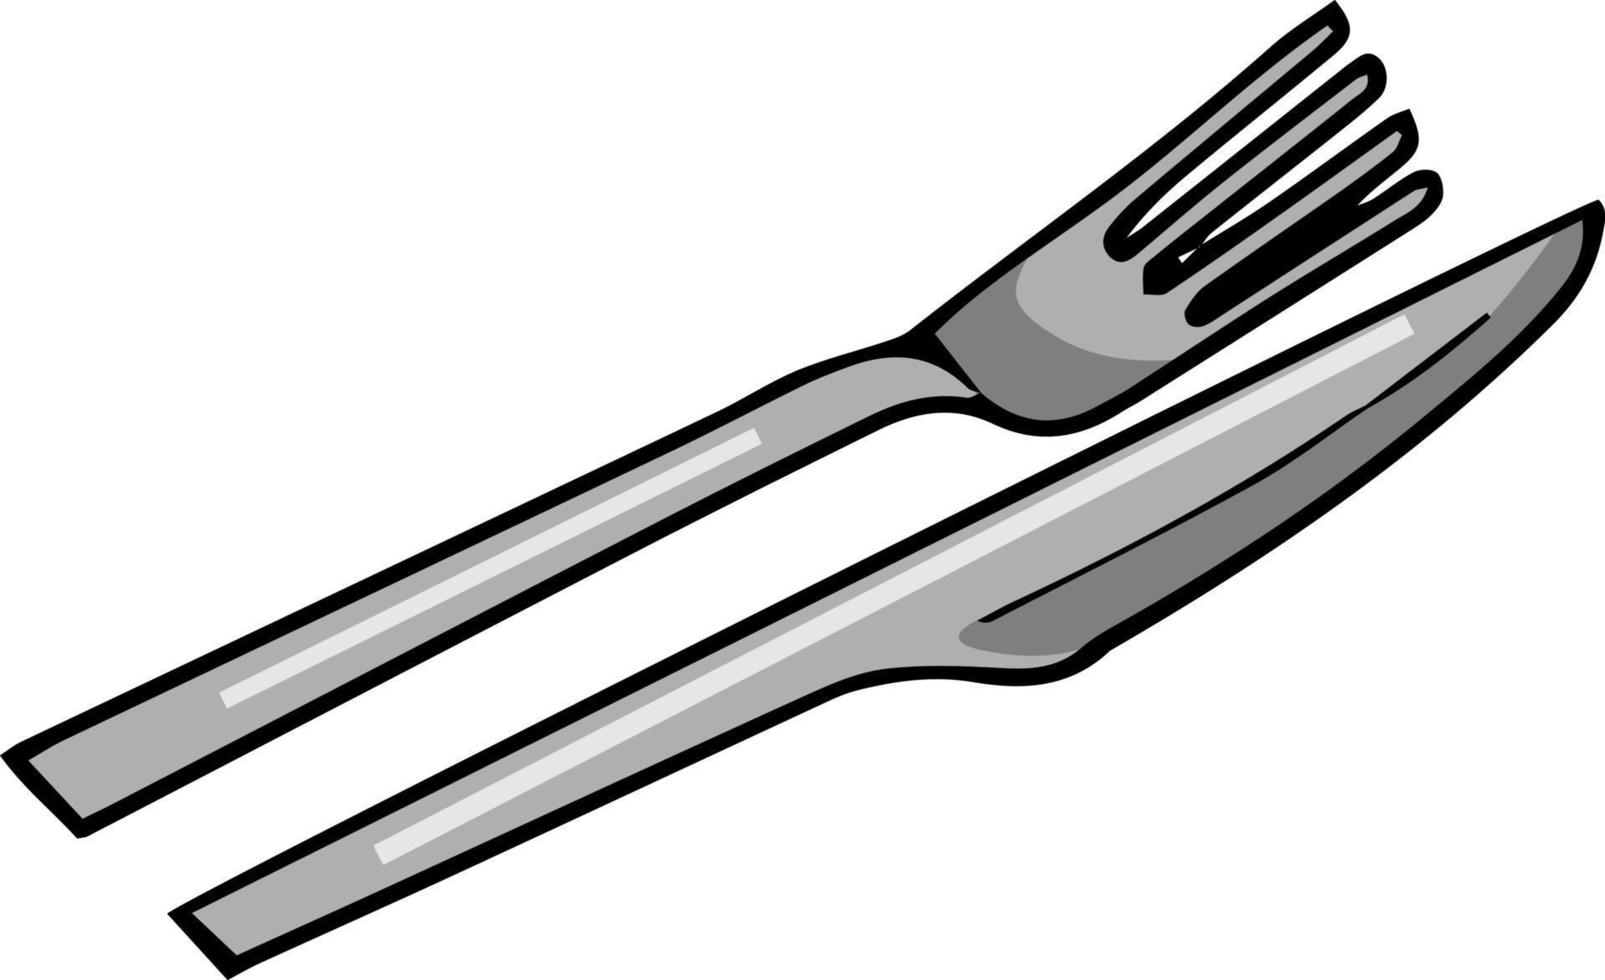 A pair of silver fork and knife, illustration, vector on white background.